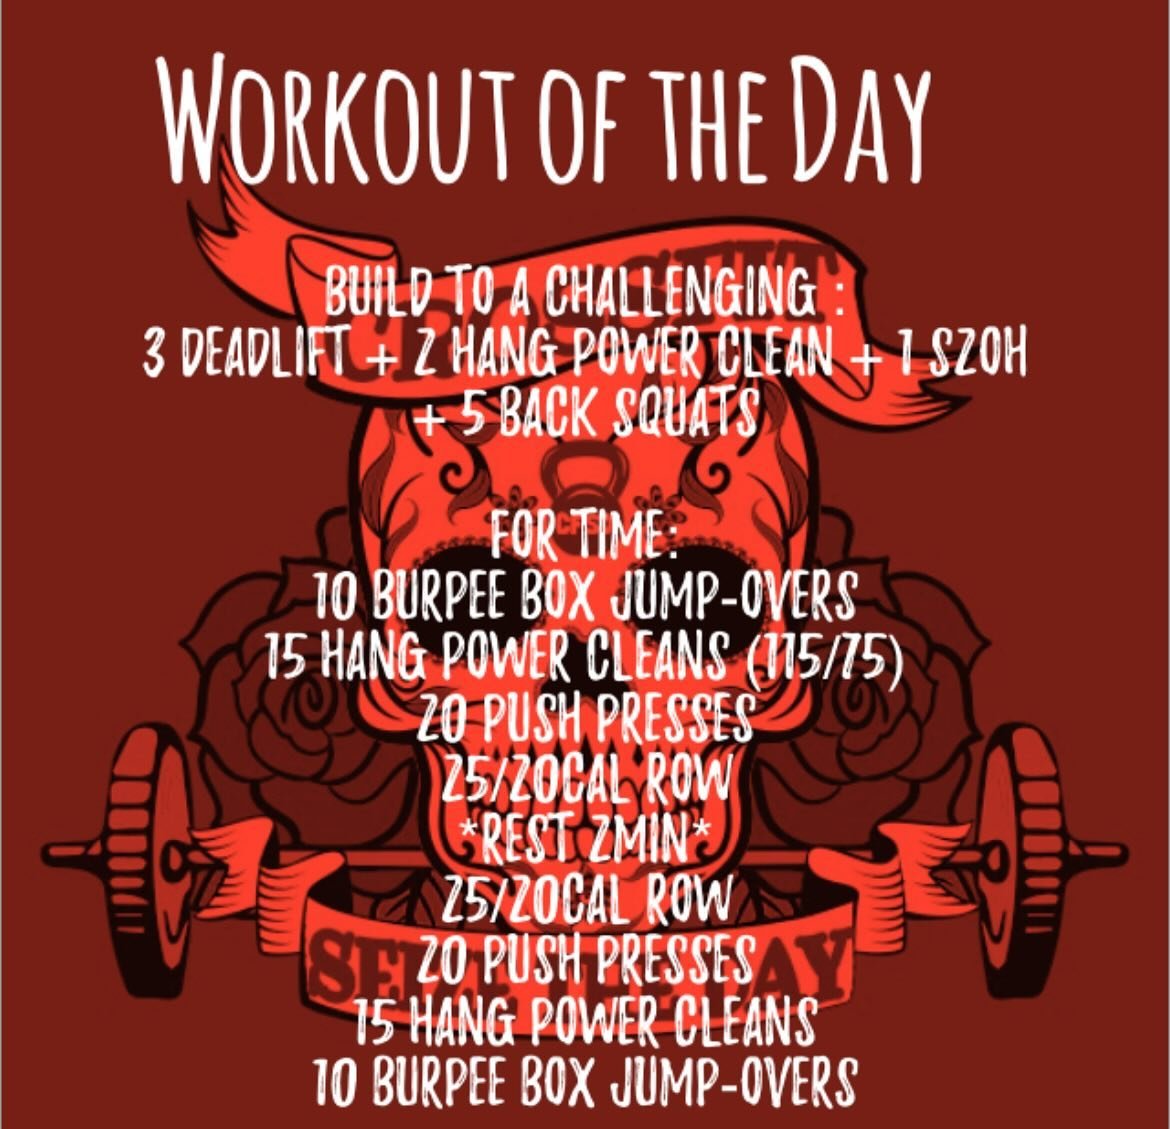 Wednesday, May 8, 2024
Build to a challenging : 
3 Deadlift + 2 Hang Power Clean + 1 S2OH + 5 Back Squats
&hellip;
Part 2 - For time:080323
10 Burpee Box Jump-overs
15 Hang Power Cleans (115/75)
20 Push Presses
25/20cal Row
*rest 3min*
25/20cal Row
2